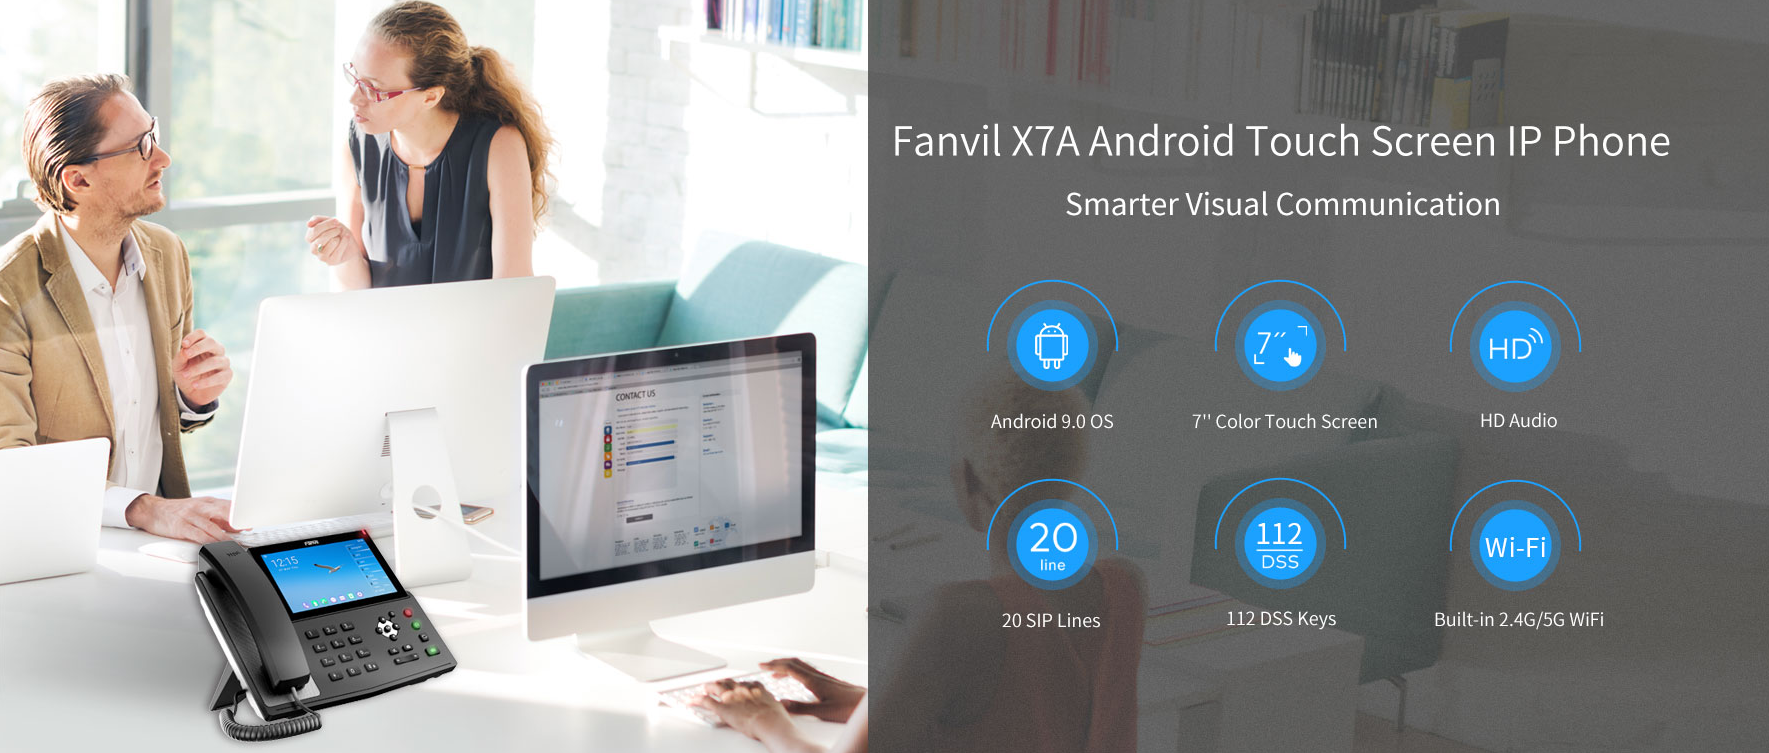 Fanvil X7A Android Touch Screen IP Phone - Hong Kong Supplier - Sipmax Technology Group - 香港代理